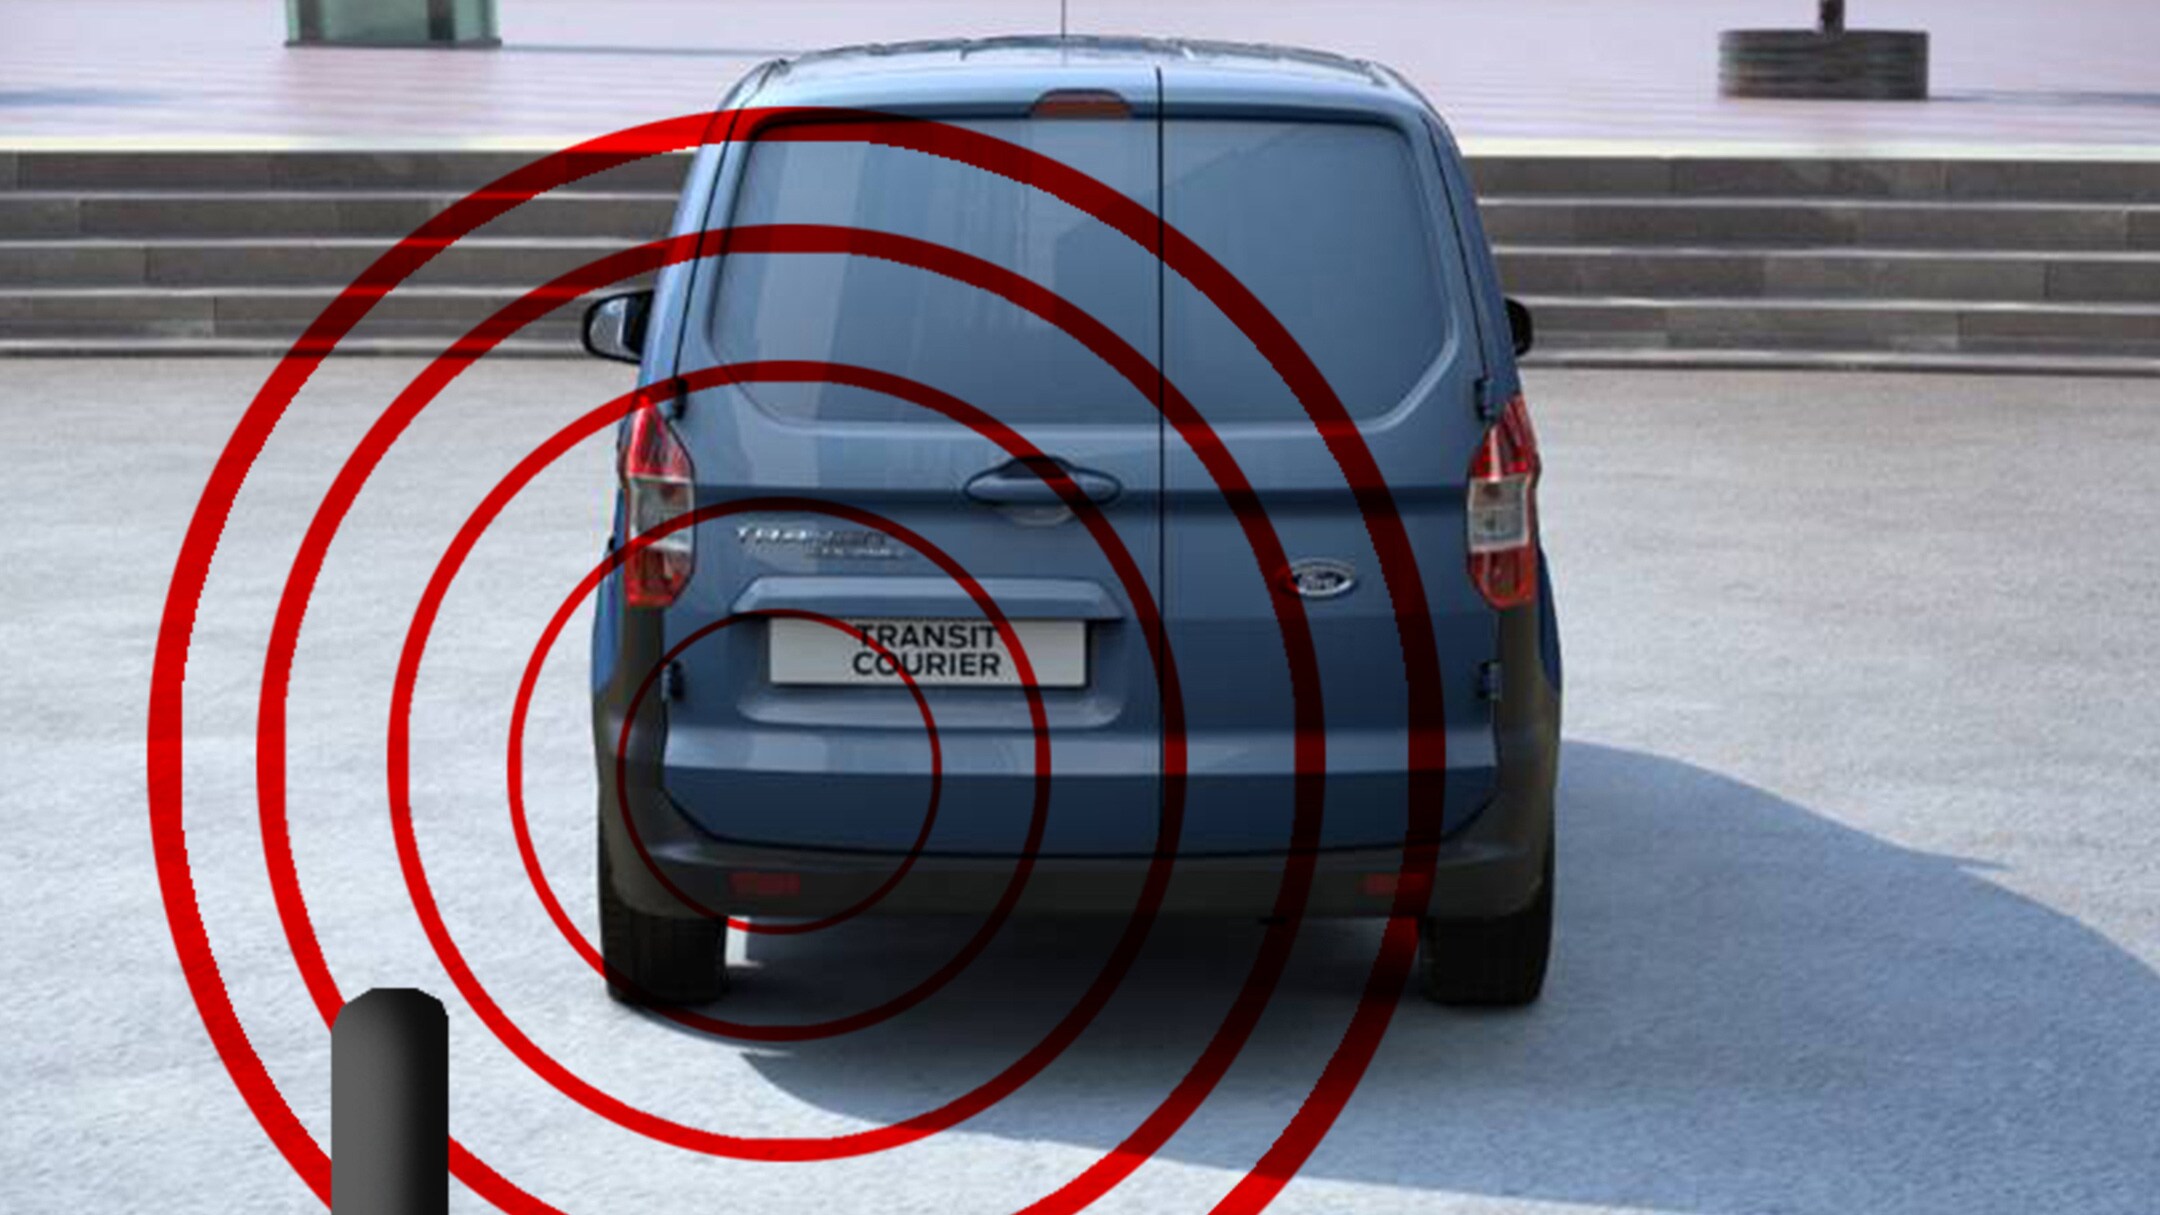 New Ford Transit Courier parking distance sensors